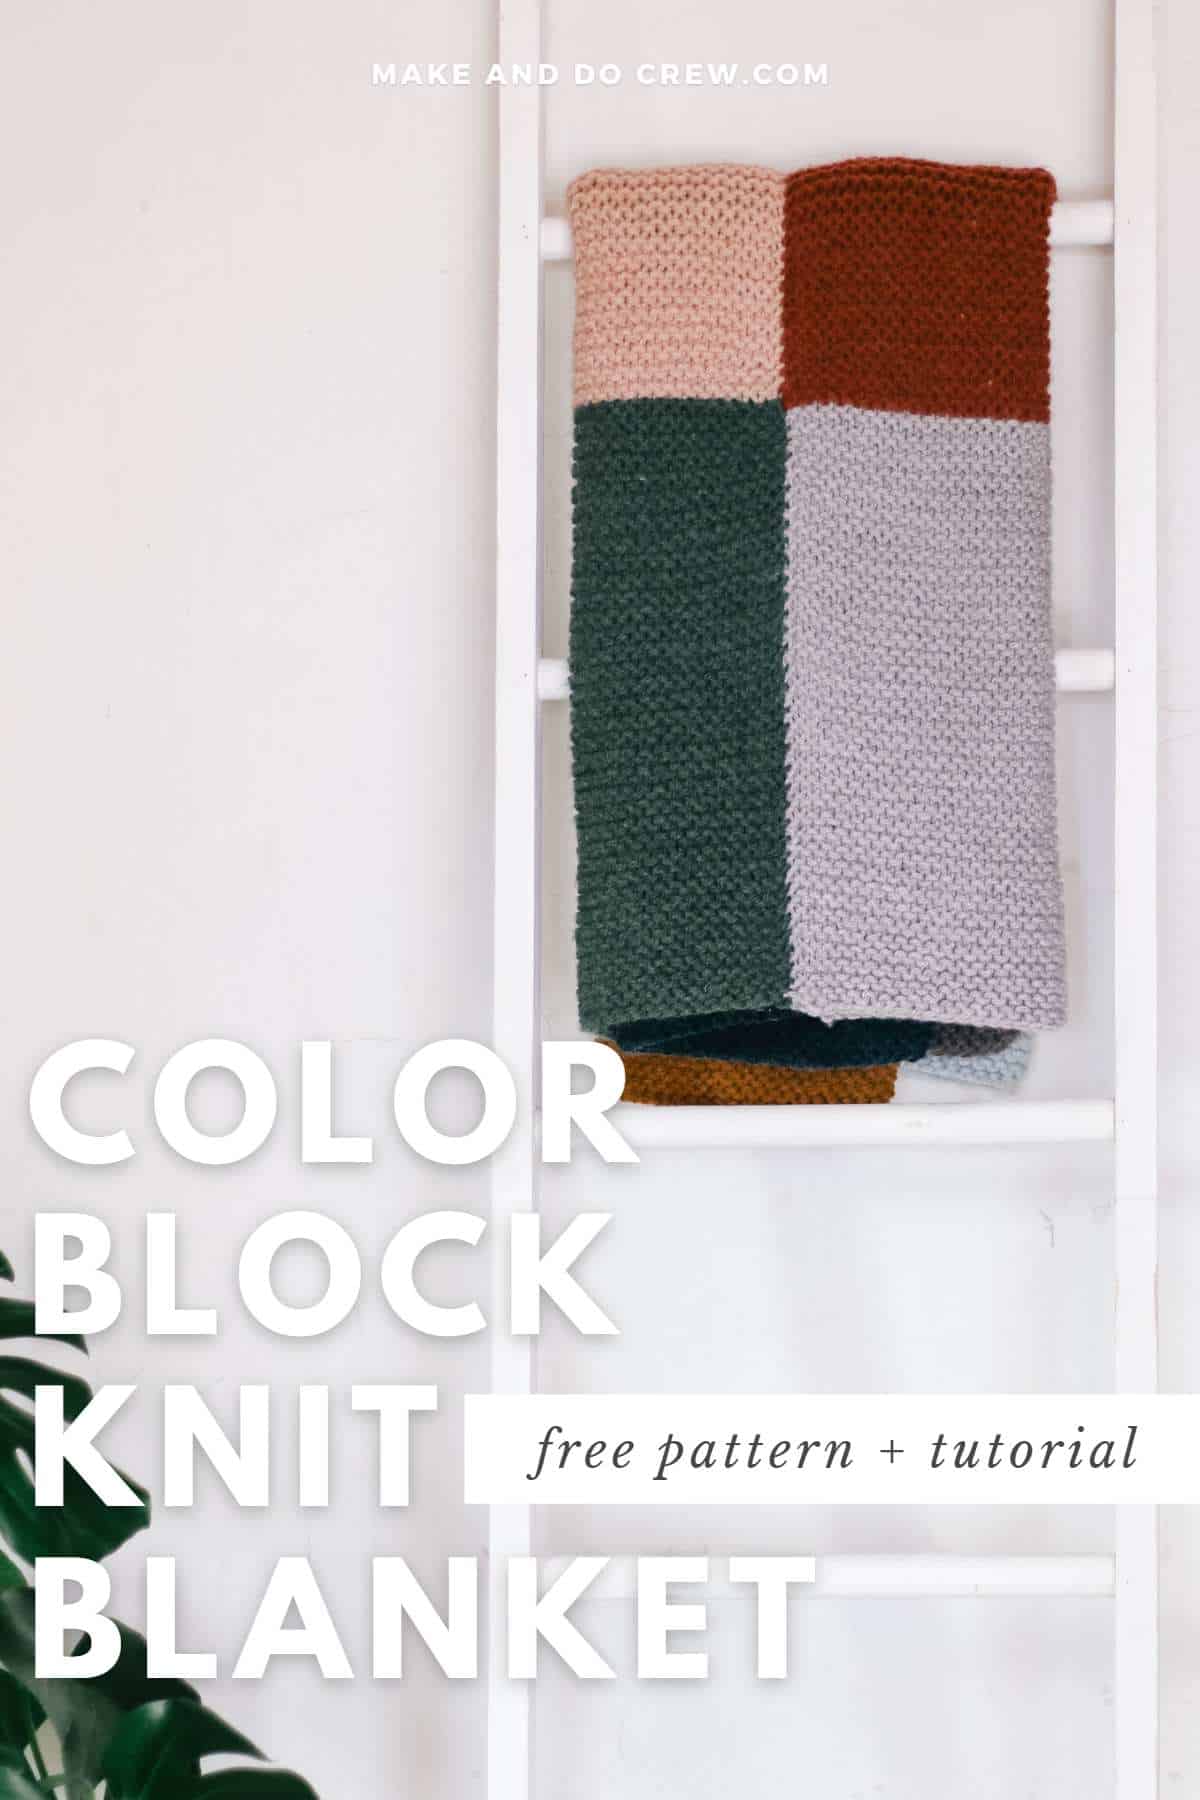 A color block knit blanket hanging on a white ladder.